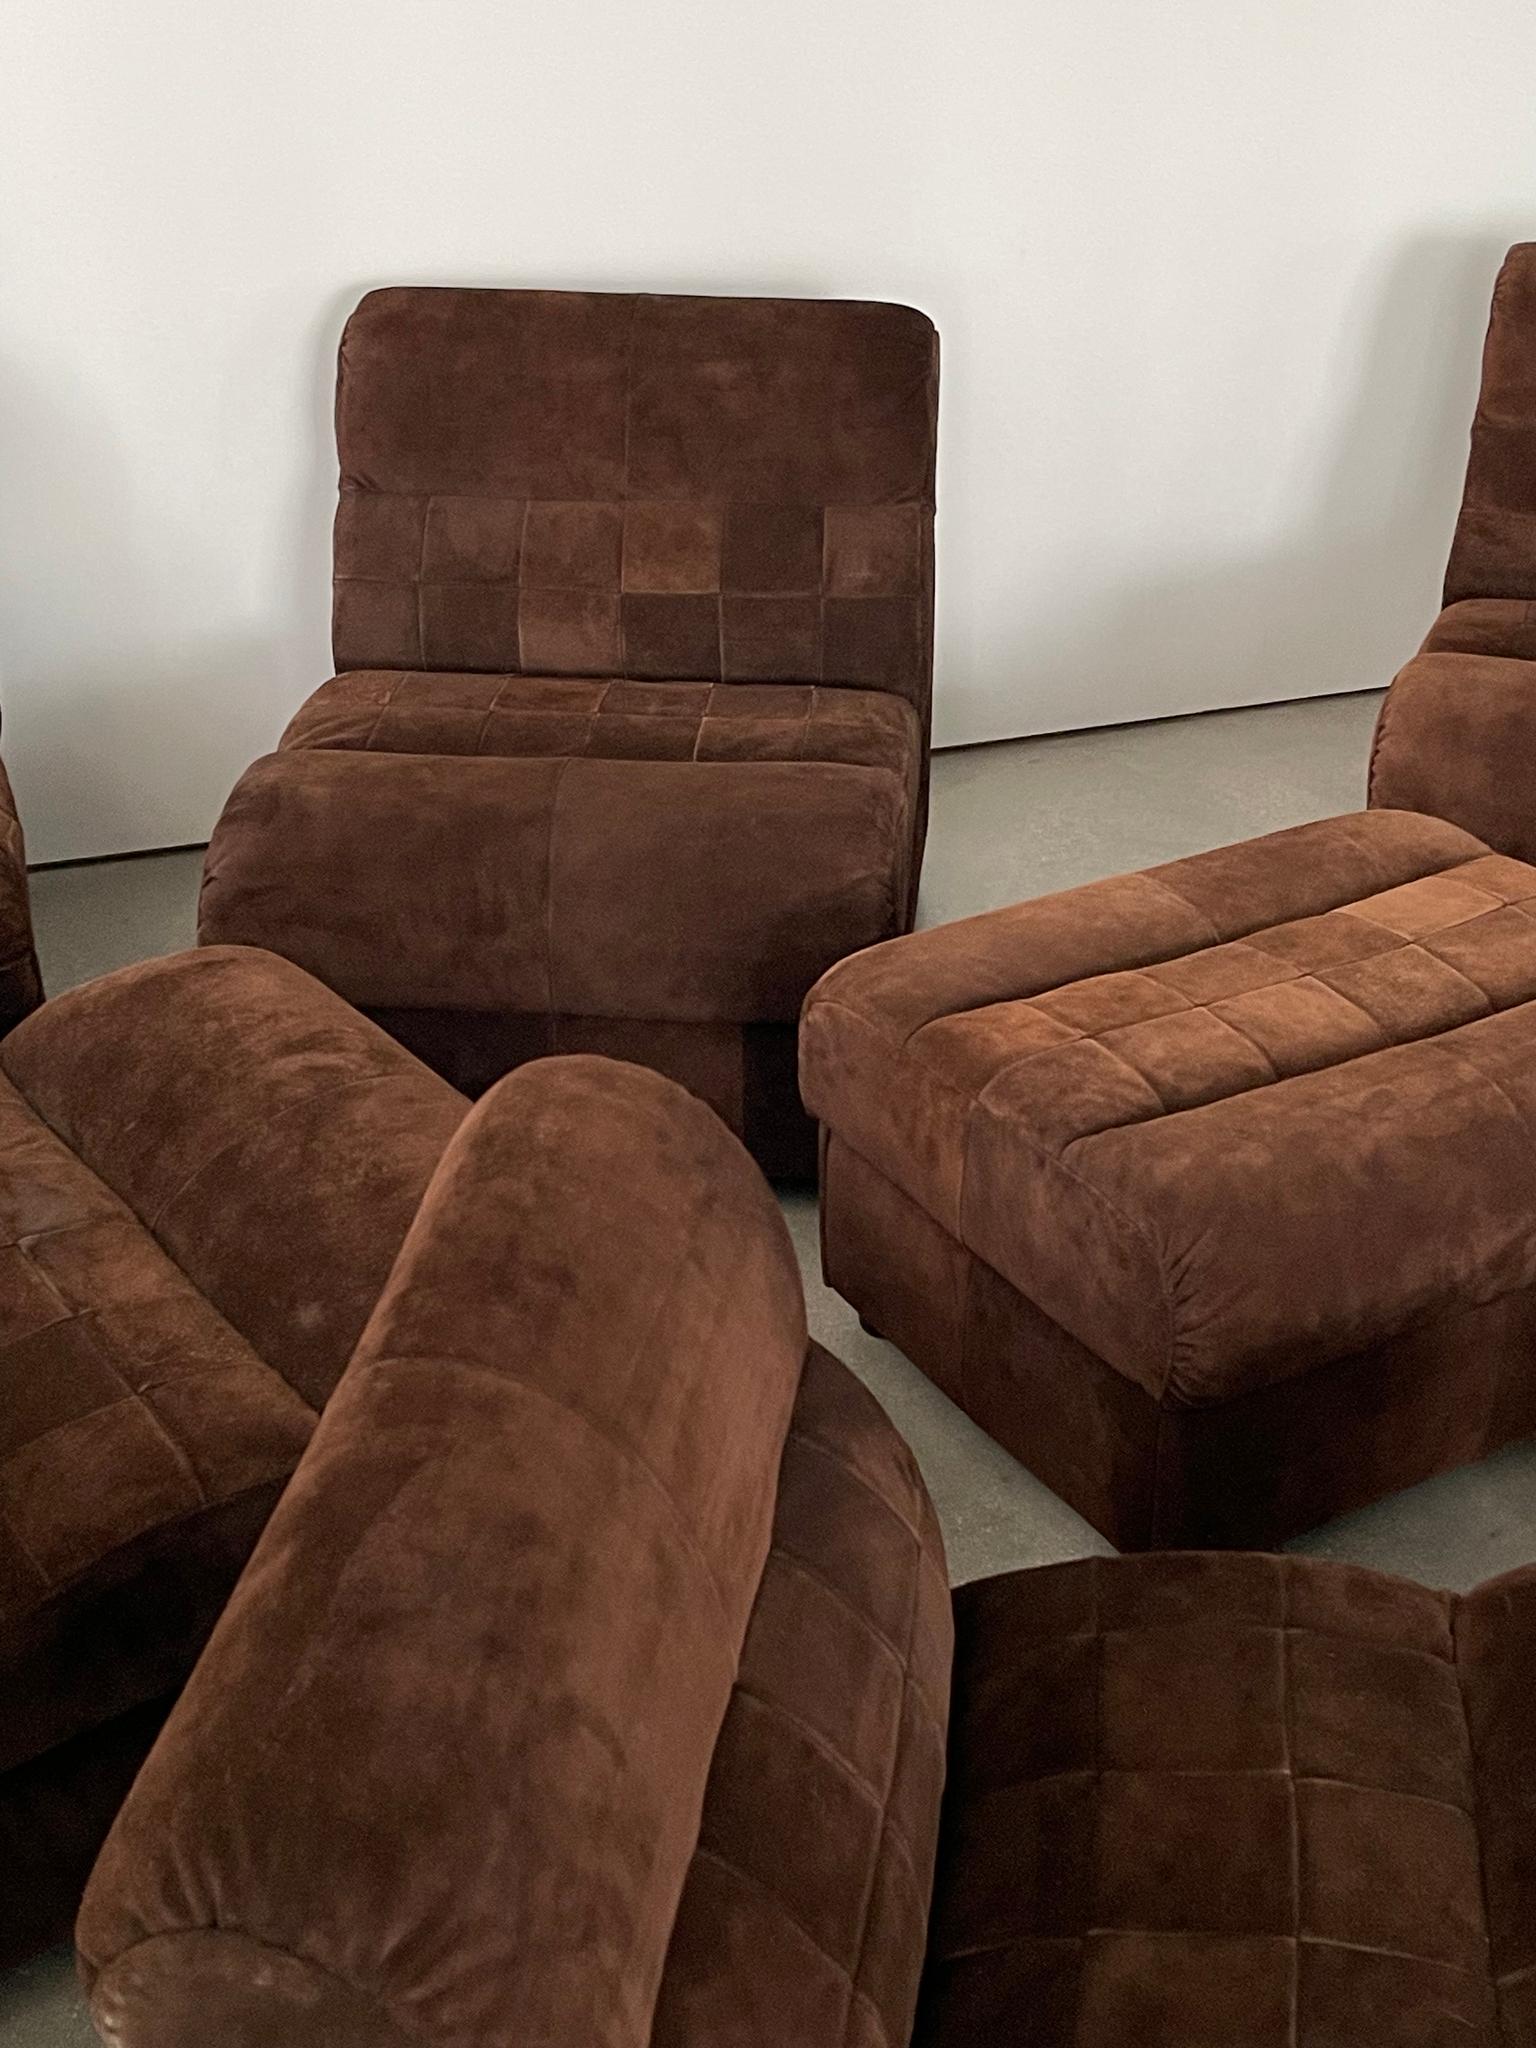 This 1960's Chocolate Suede Patchwork Percival Lafer Sectional Sofa come with 7 pieces including an ottoman and a corner piece. Modern Brazilian sofa is very versatile with strong suede patchwork. Customize it and break it up within your living room